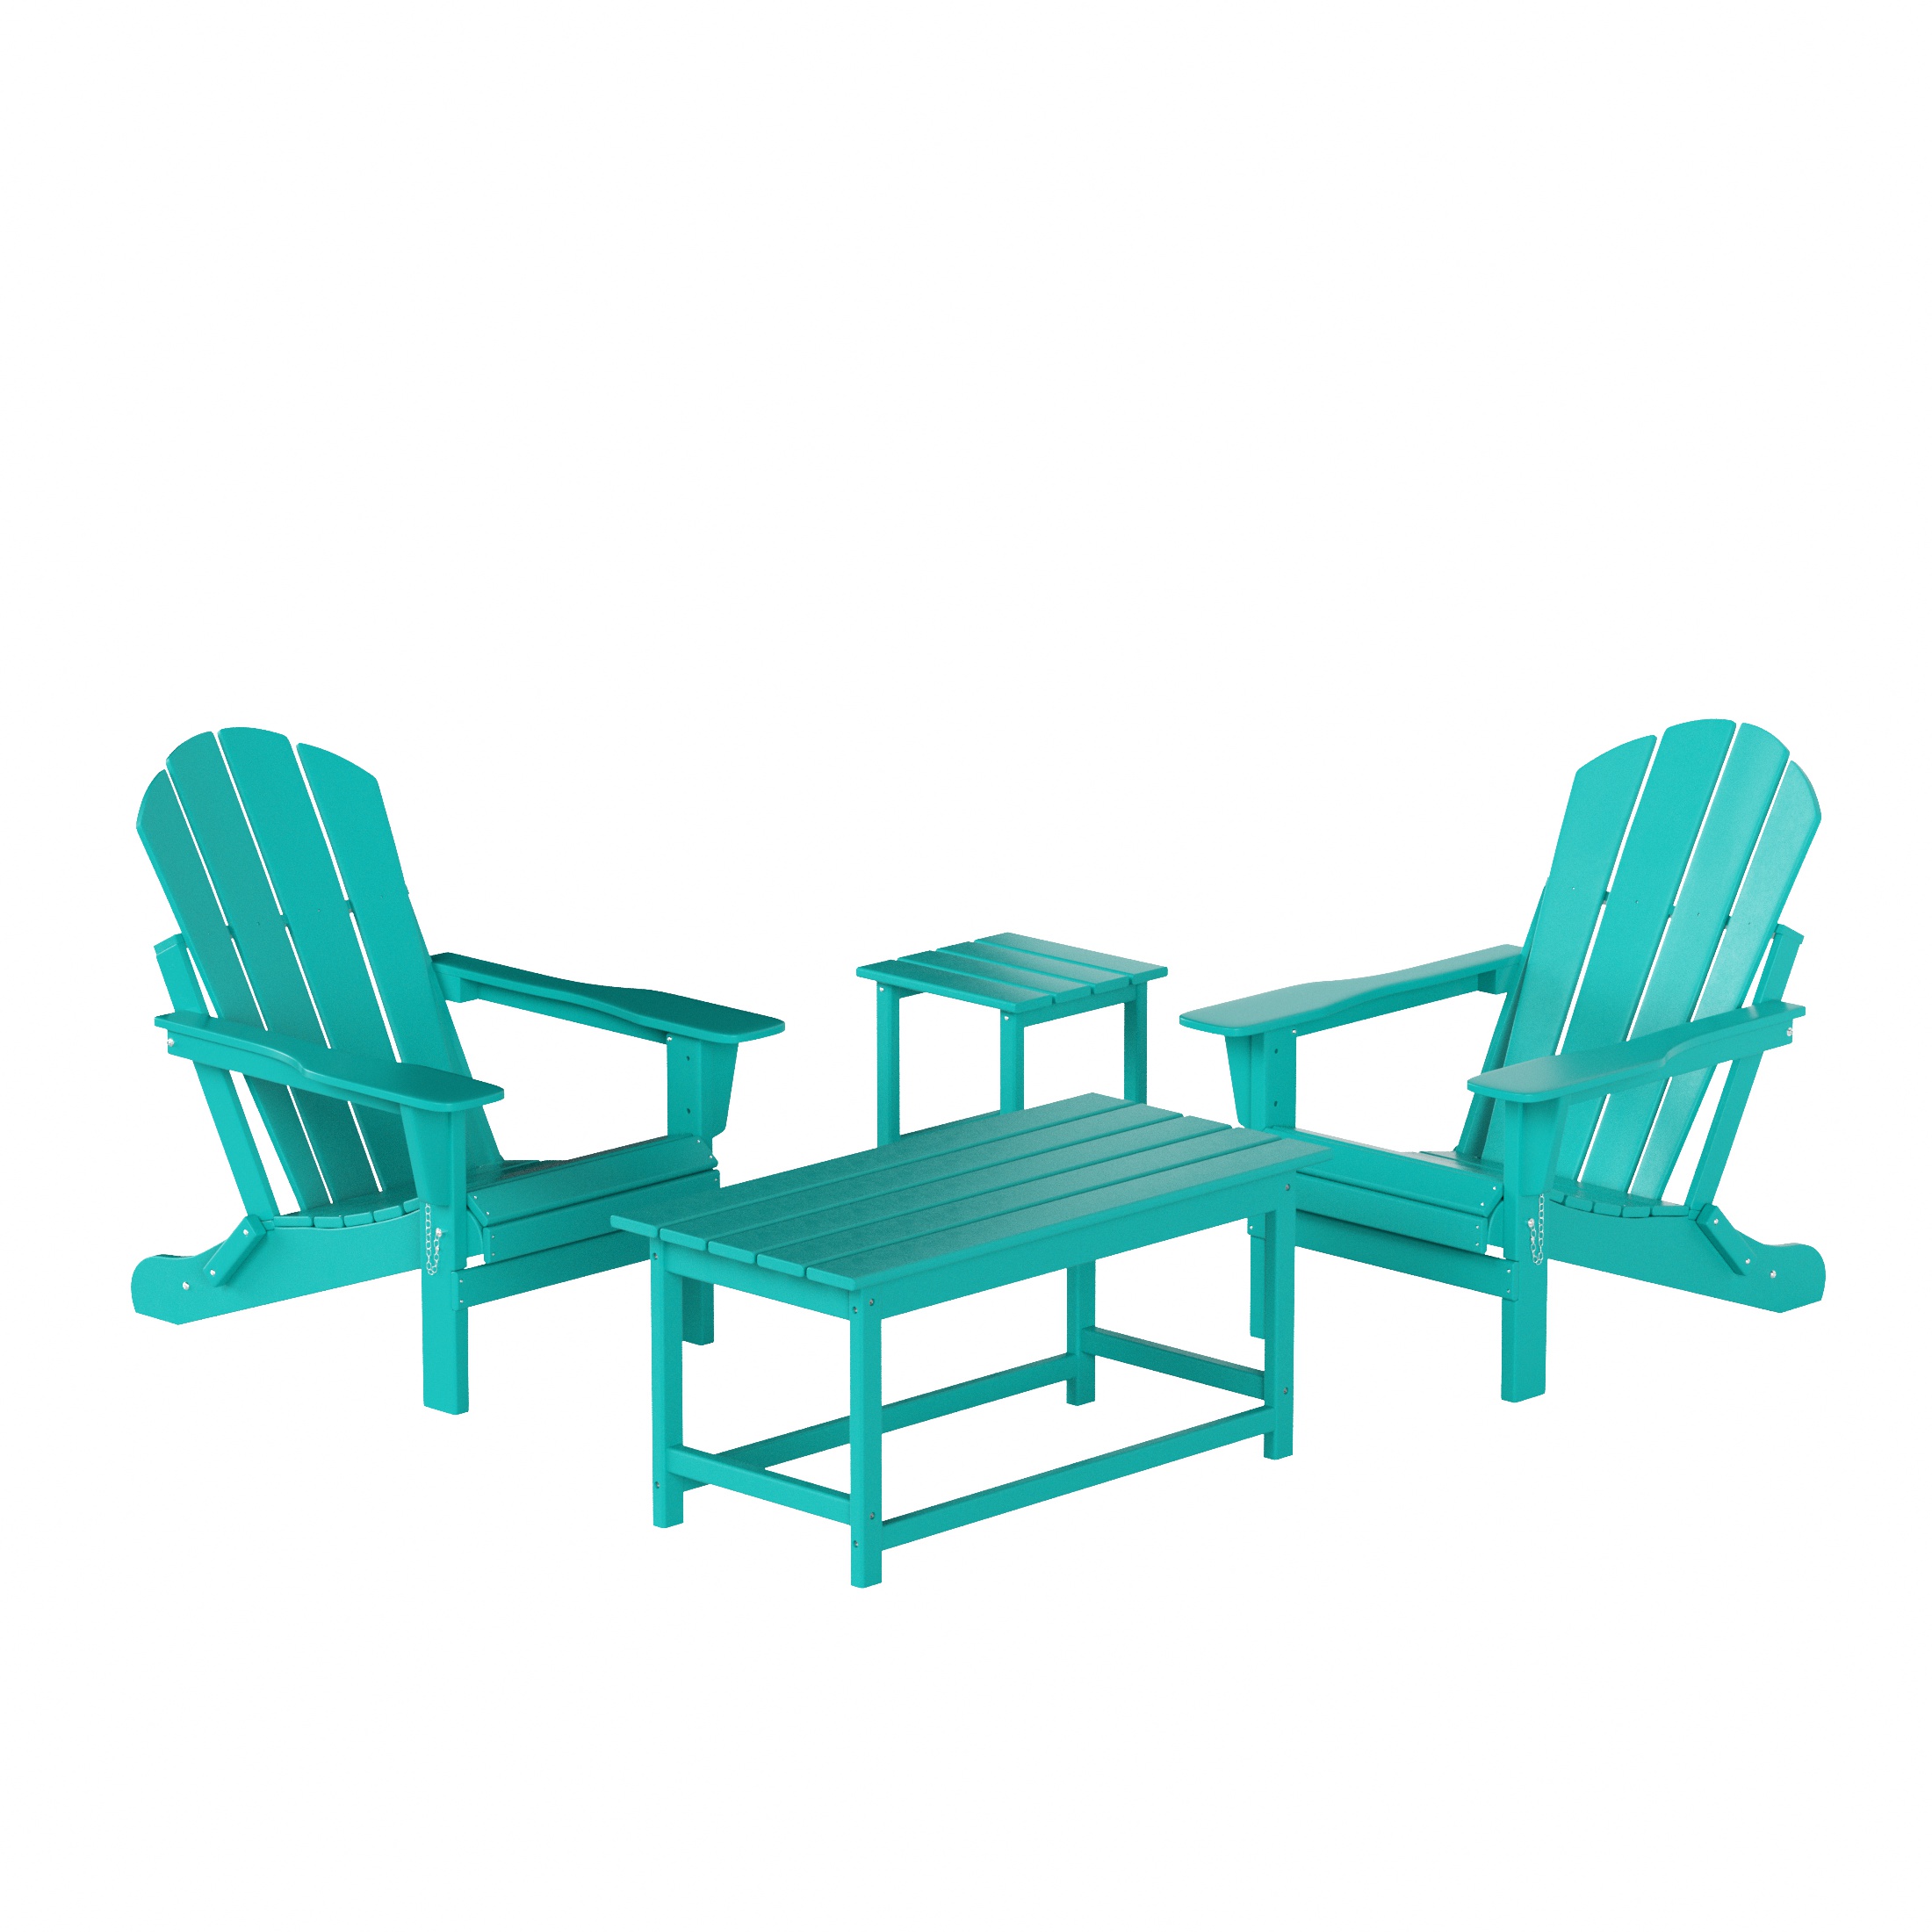 WestinTrends Malibu 4-Pieces Outdoor Patio Furniture Set, All Weather Outdoor Seating Plastic Adirondack Chair Set of 2 with Coffee Table and Side Table, Turquoise - image 1 of 7